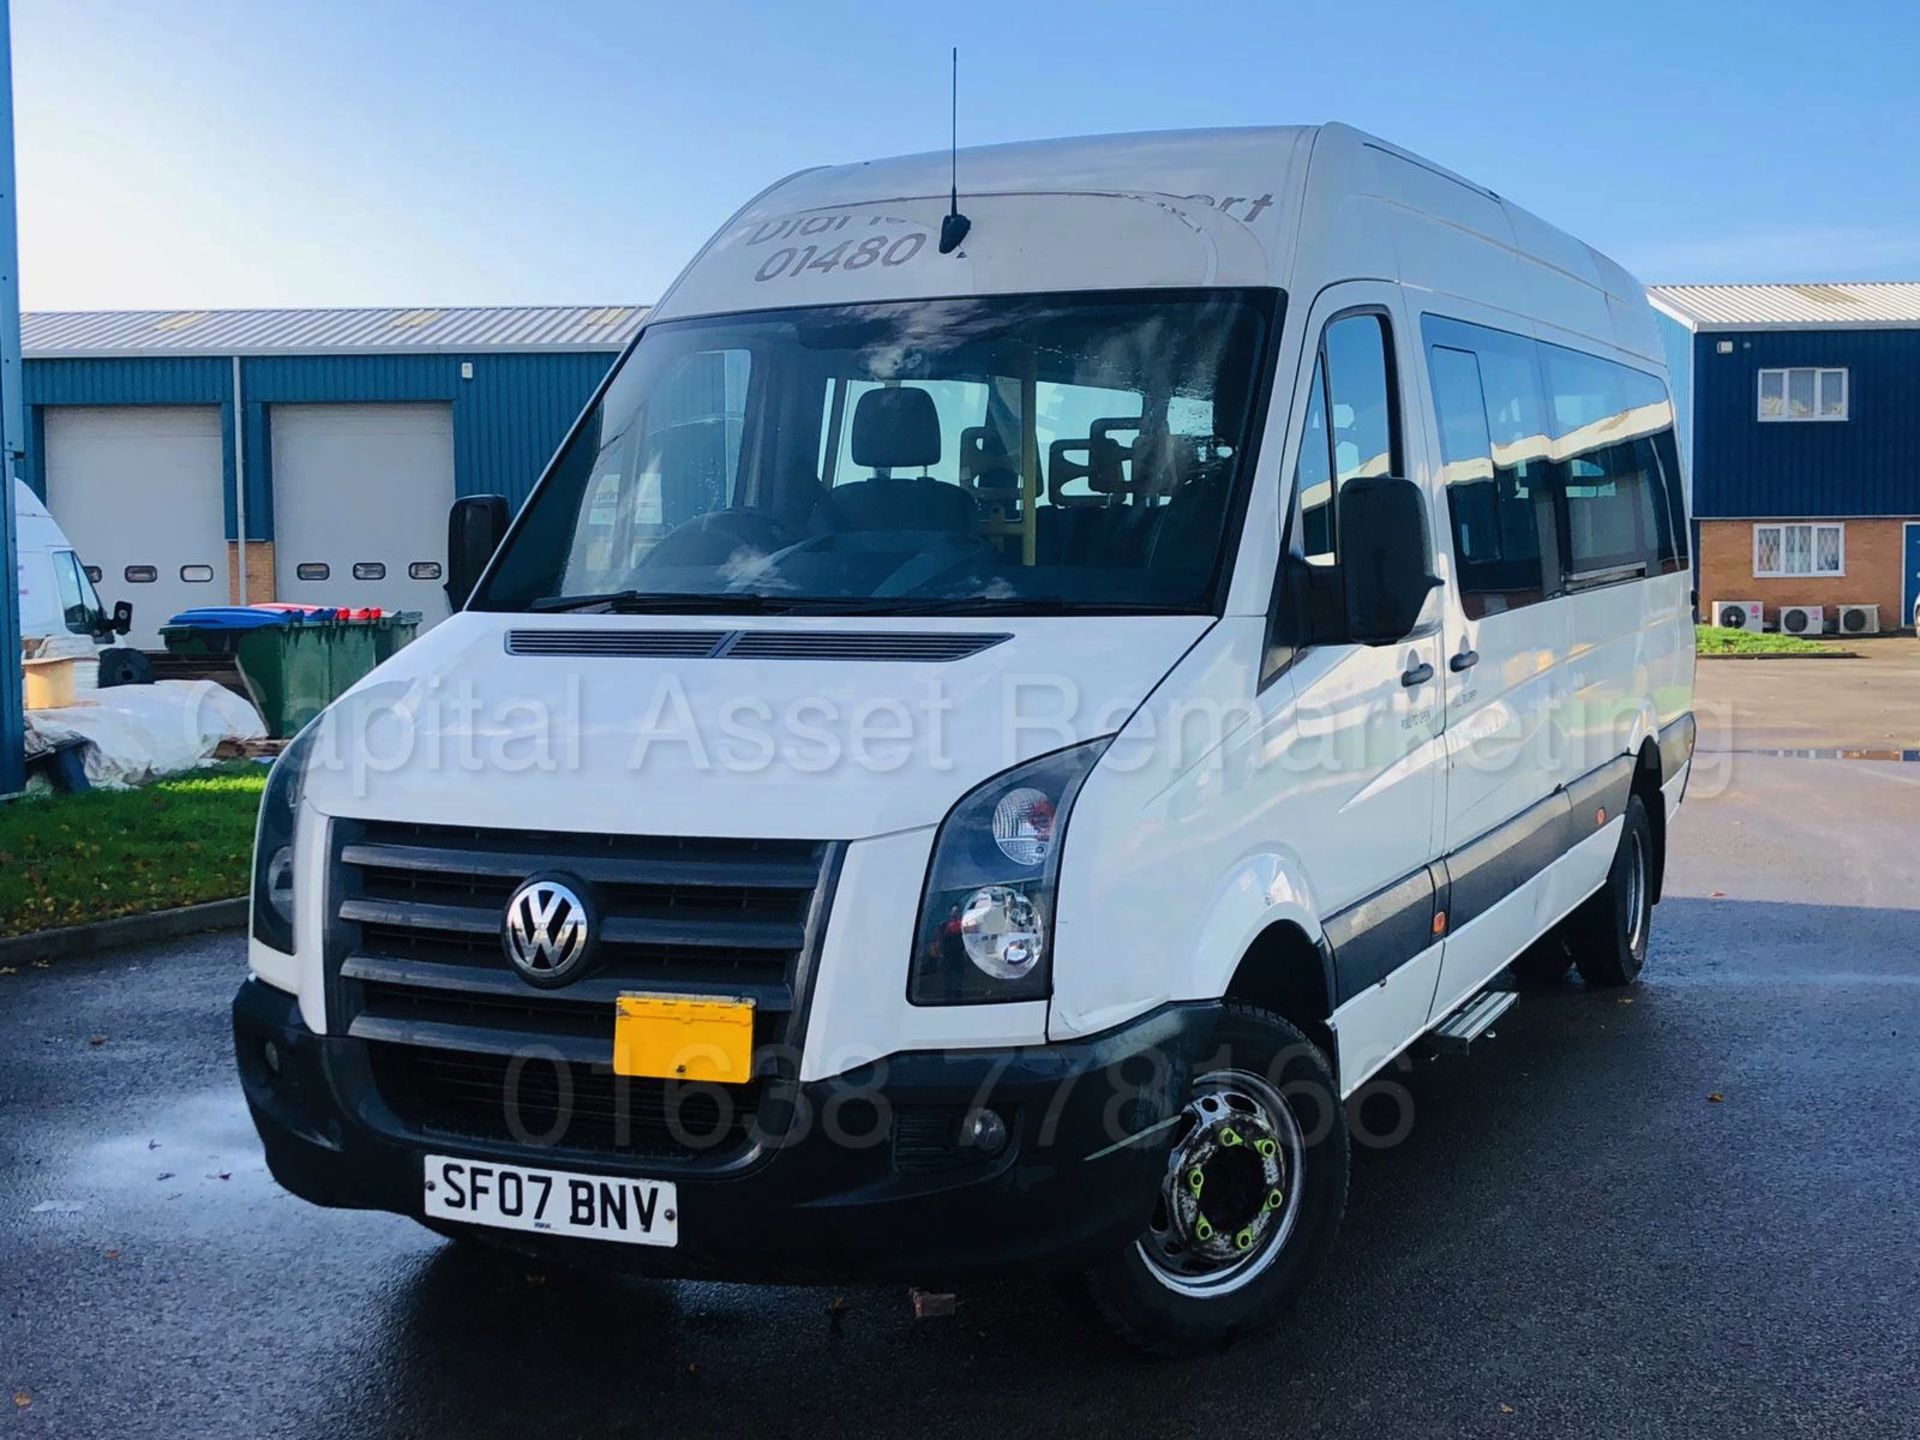 VOLKSWAGEN CRAFTER 2.5 TDI *LWB - 16 SEATER MINI-BUS / COACH* (2007) *ELECTRIC WHEEL CHAIR LIFT* - Image 2 of 38